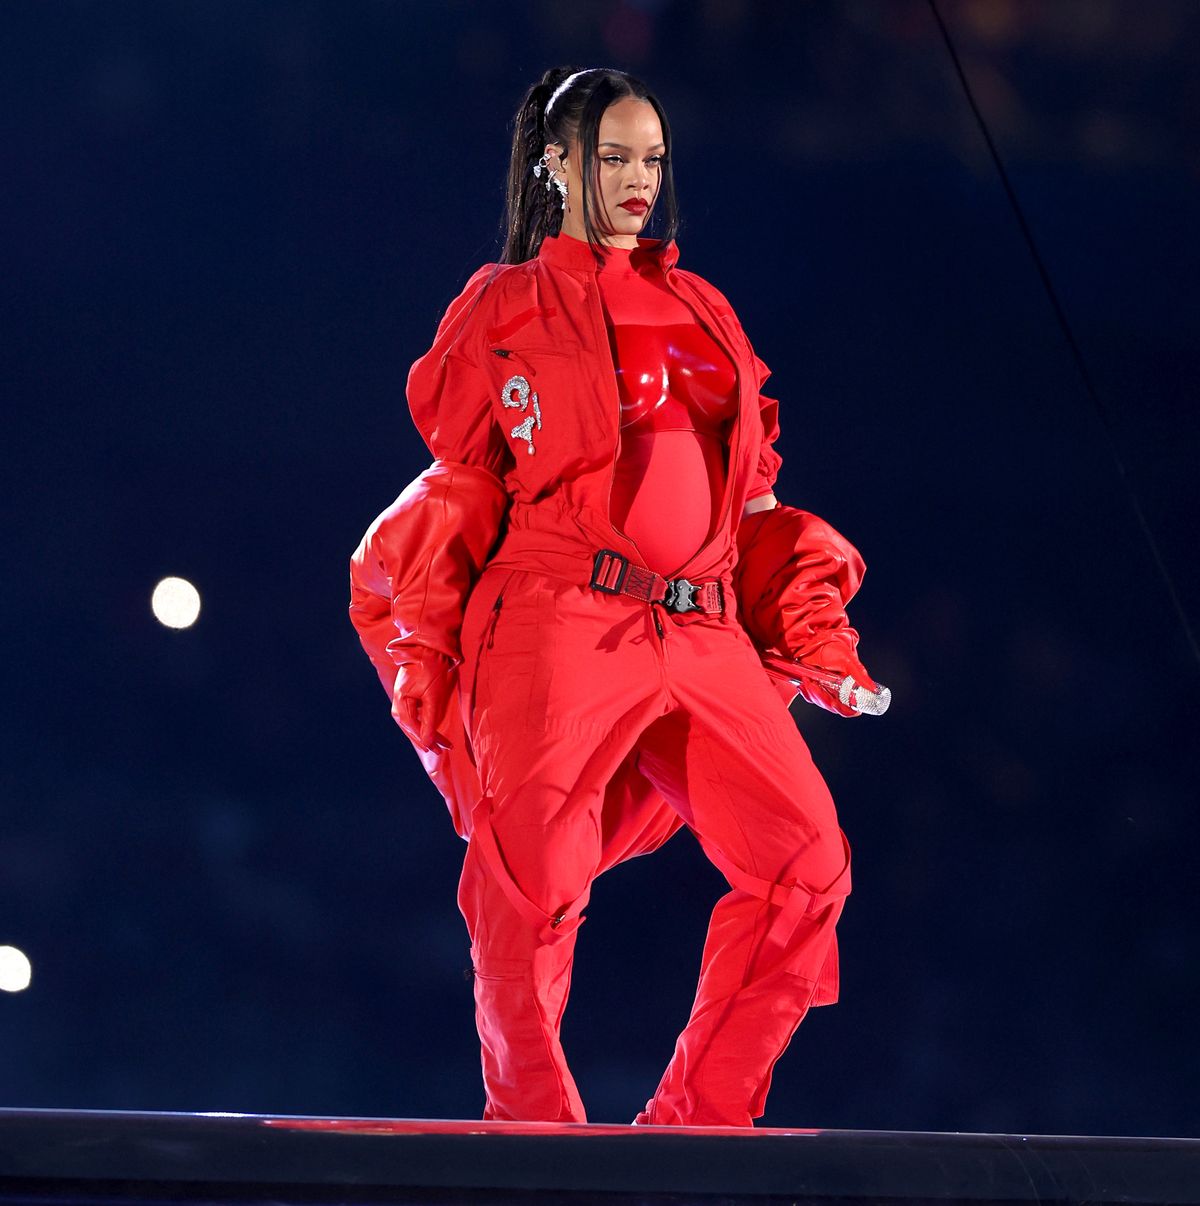 glendale, arizona february 12 rihanna performs onstage during the apple music super bowl lvii halftime show at state farm stadium on february 12, 2023 in glendale, arizona photo by gregory shamusgetty images